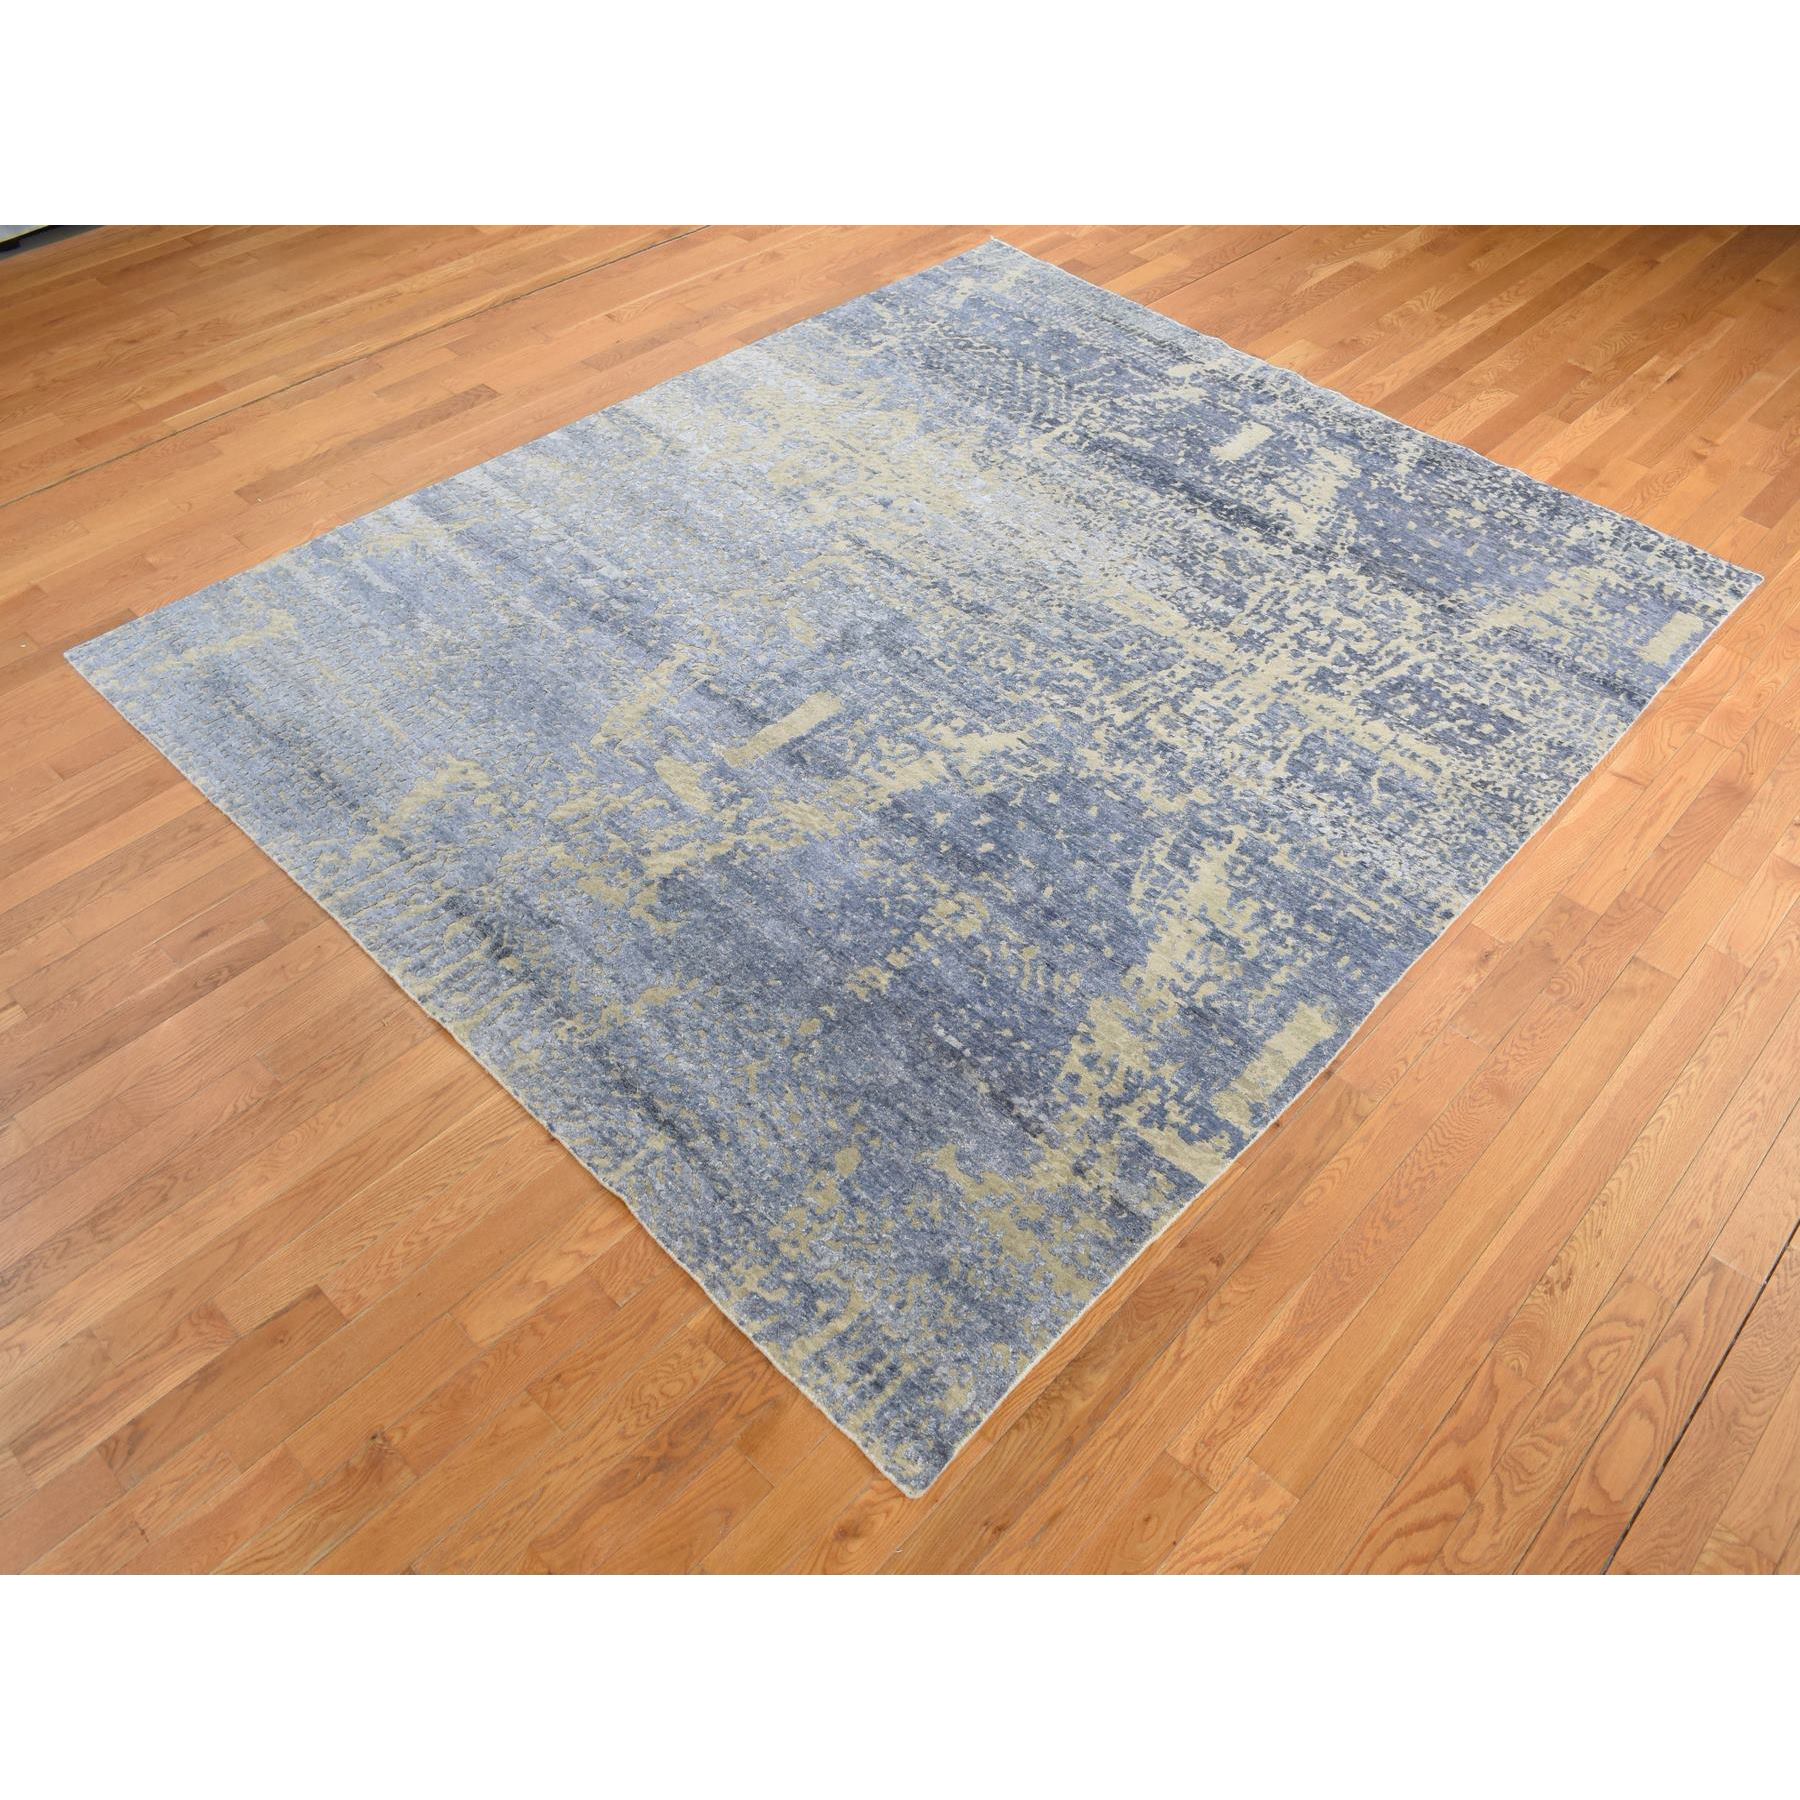  Silk Hand-Knotted Area Rug 8'0